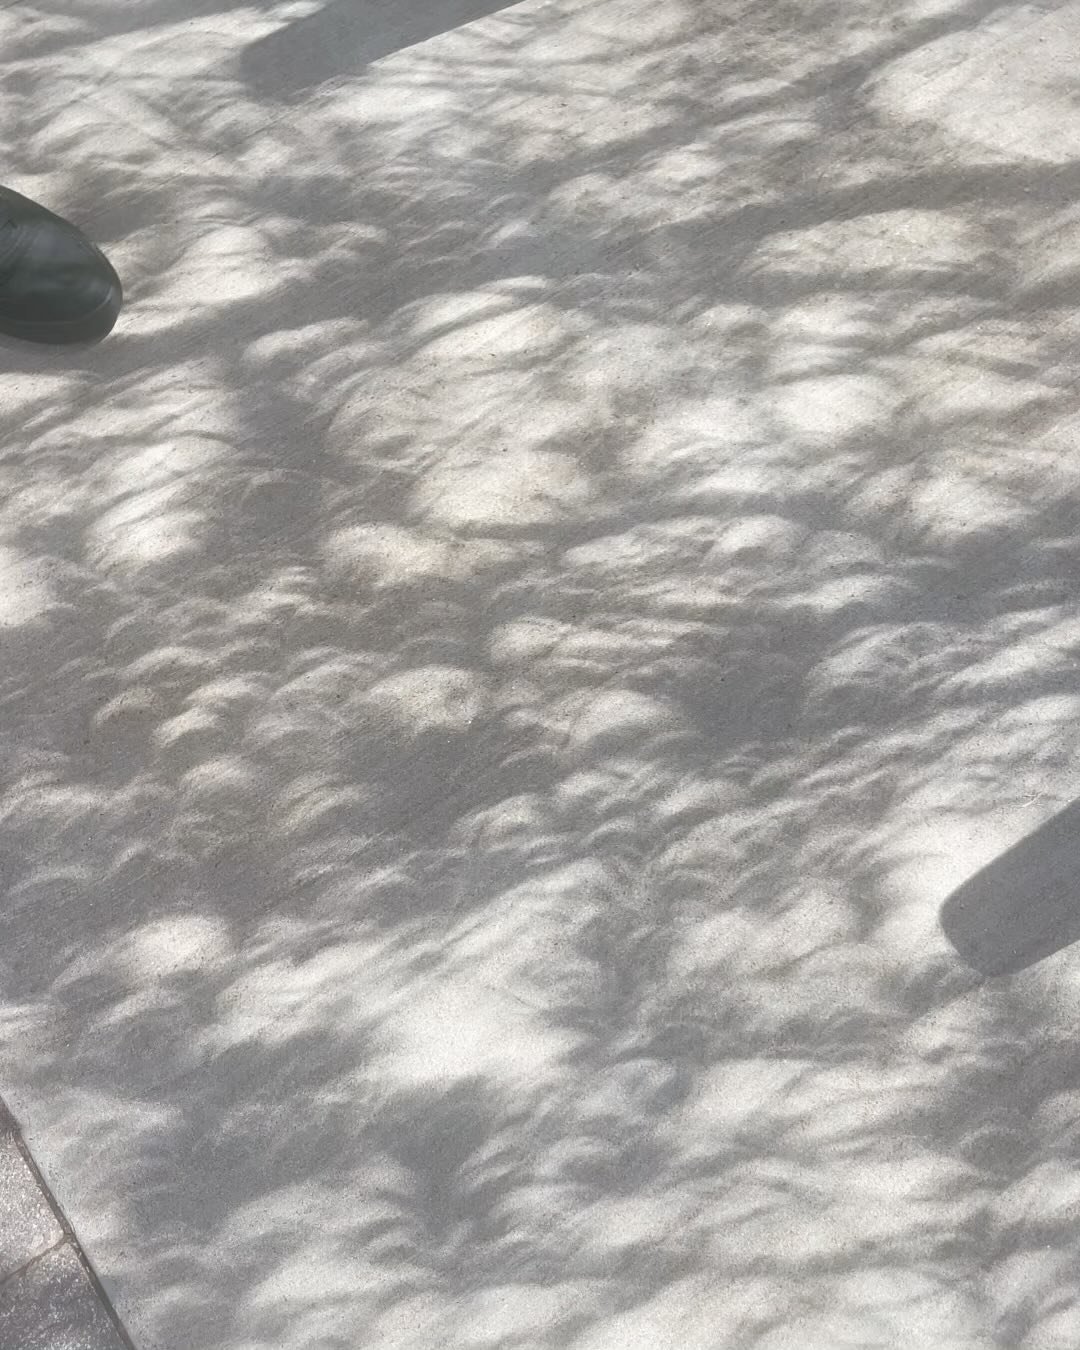 Alive during an eclipse 🌔

⚠️ Just images of the shadows ⚠️ 

Last slide looked like a painted birch tree branch

Thanks for the glasses 👓 @sciencemuseumok 🙏🏾